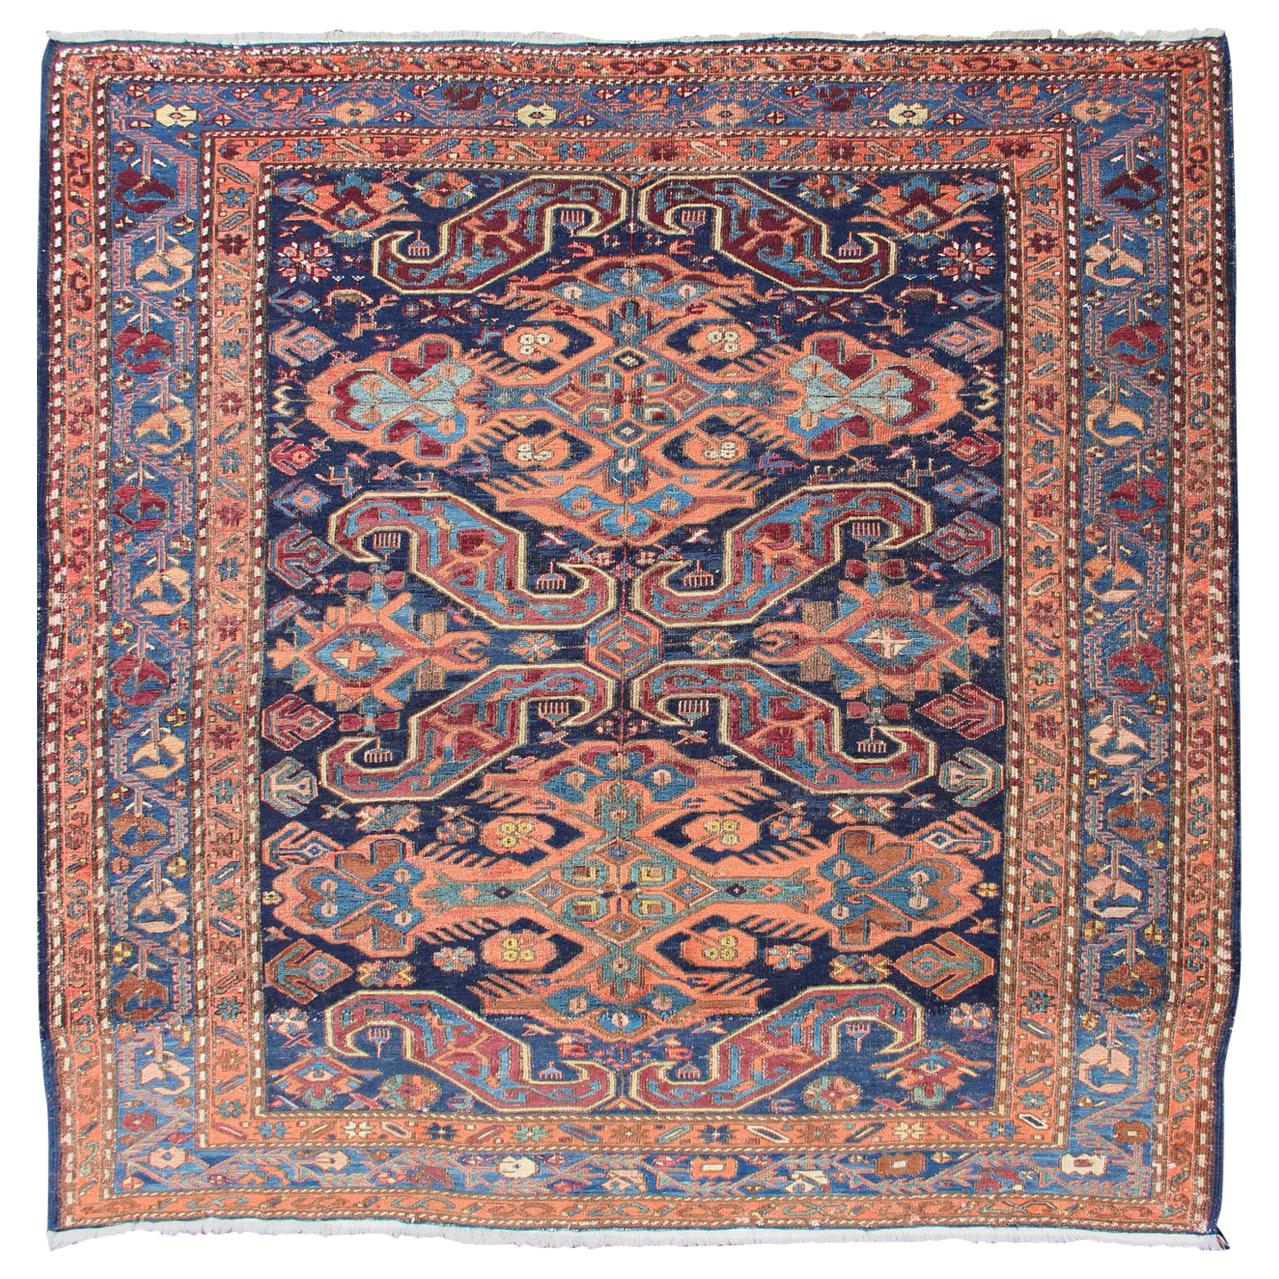 Antique Caucasian 19th Century Sumac Rug in Varying Colors of Orange and Blue For Sale